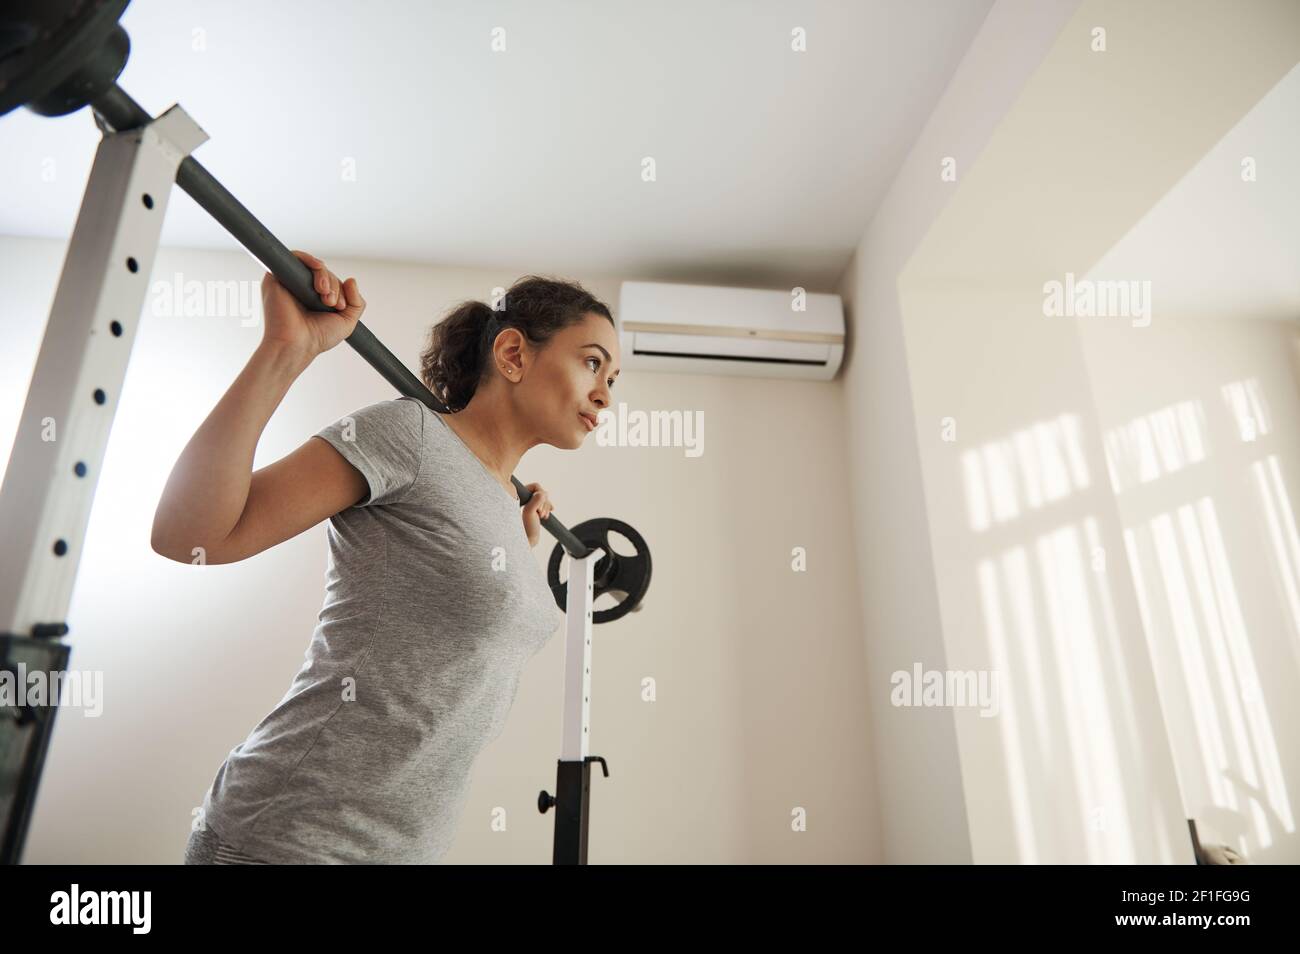 Beautiful woman training with a barbell at home. Active and healthy lifestyle concept Stock Photo